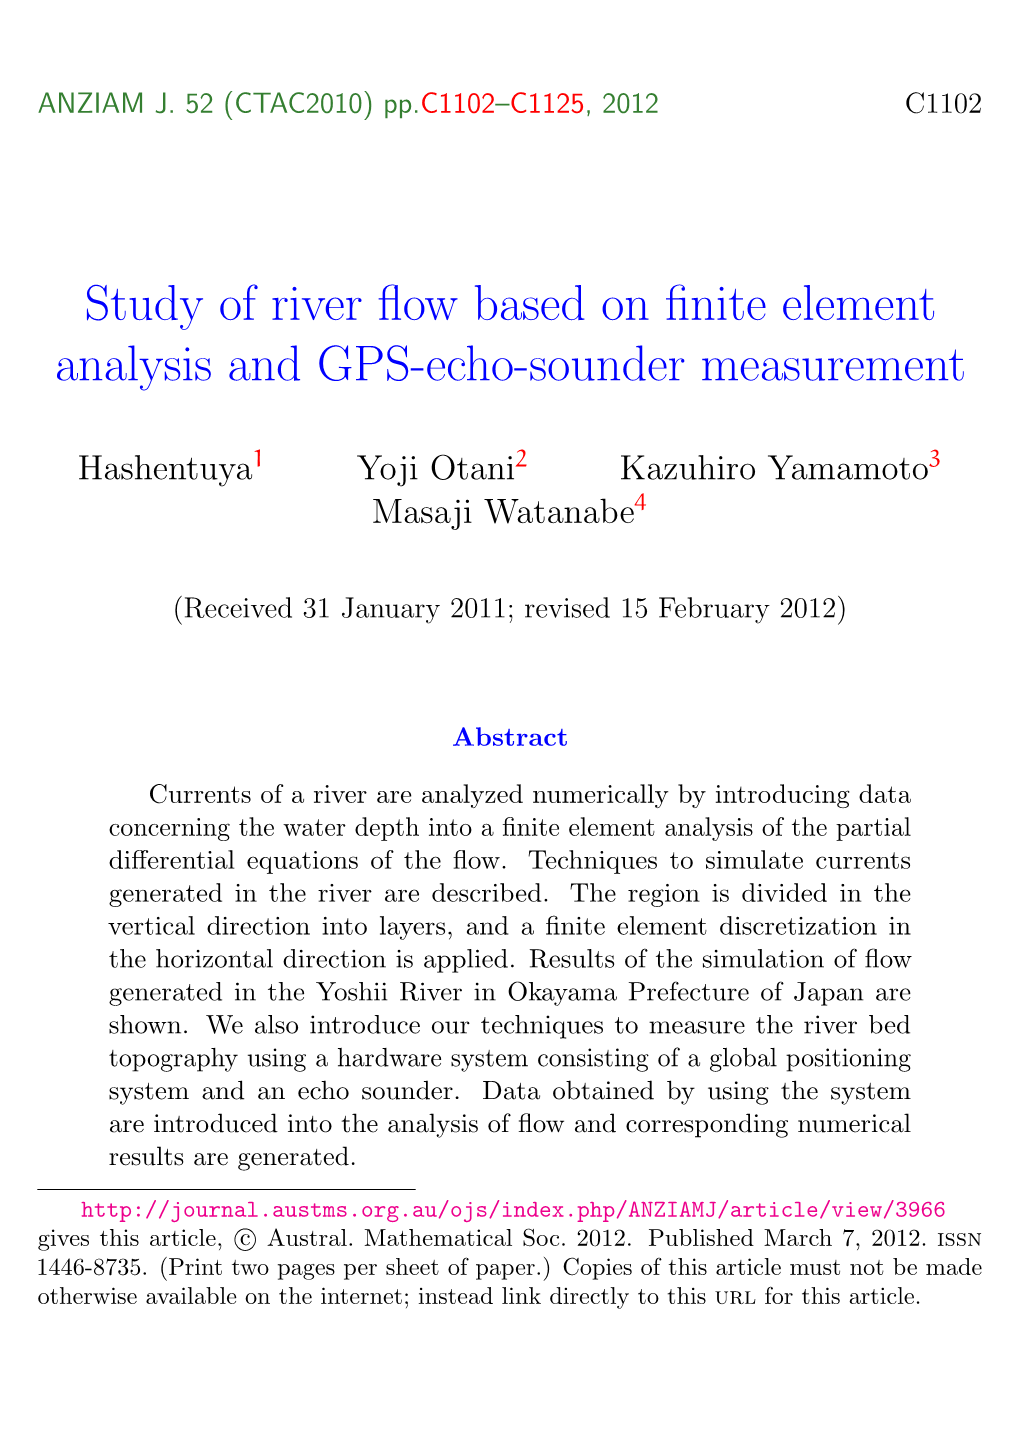 Study of River Flow Based on Finite Element Analysis and GPS-Echo